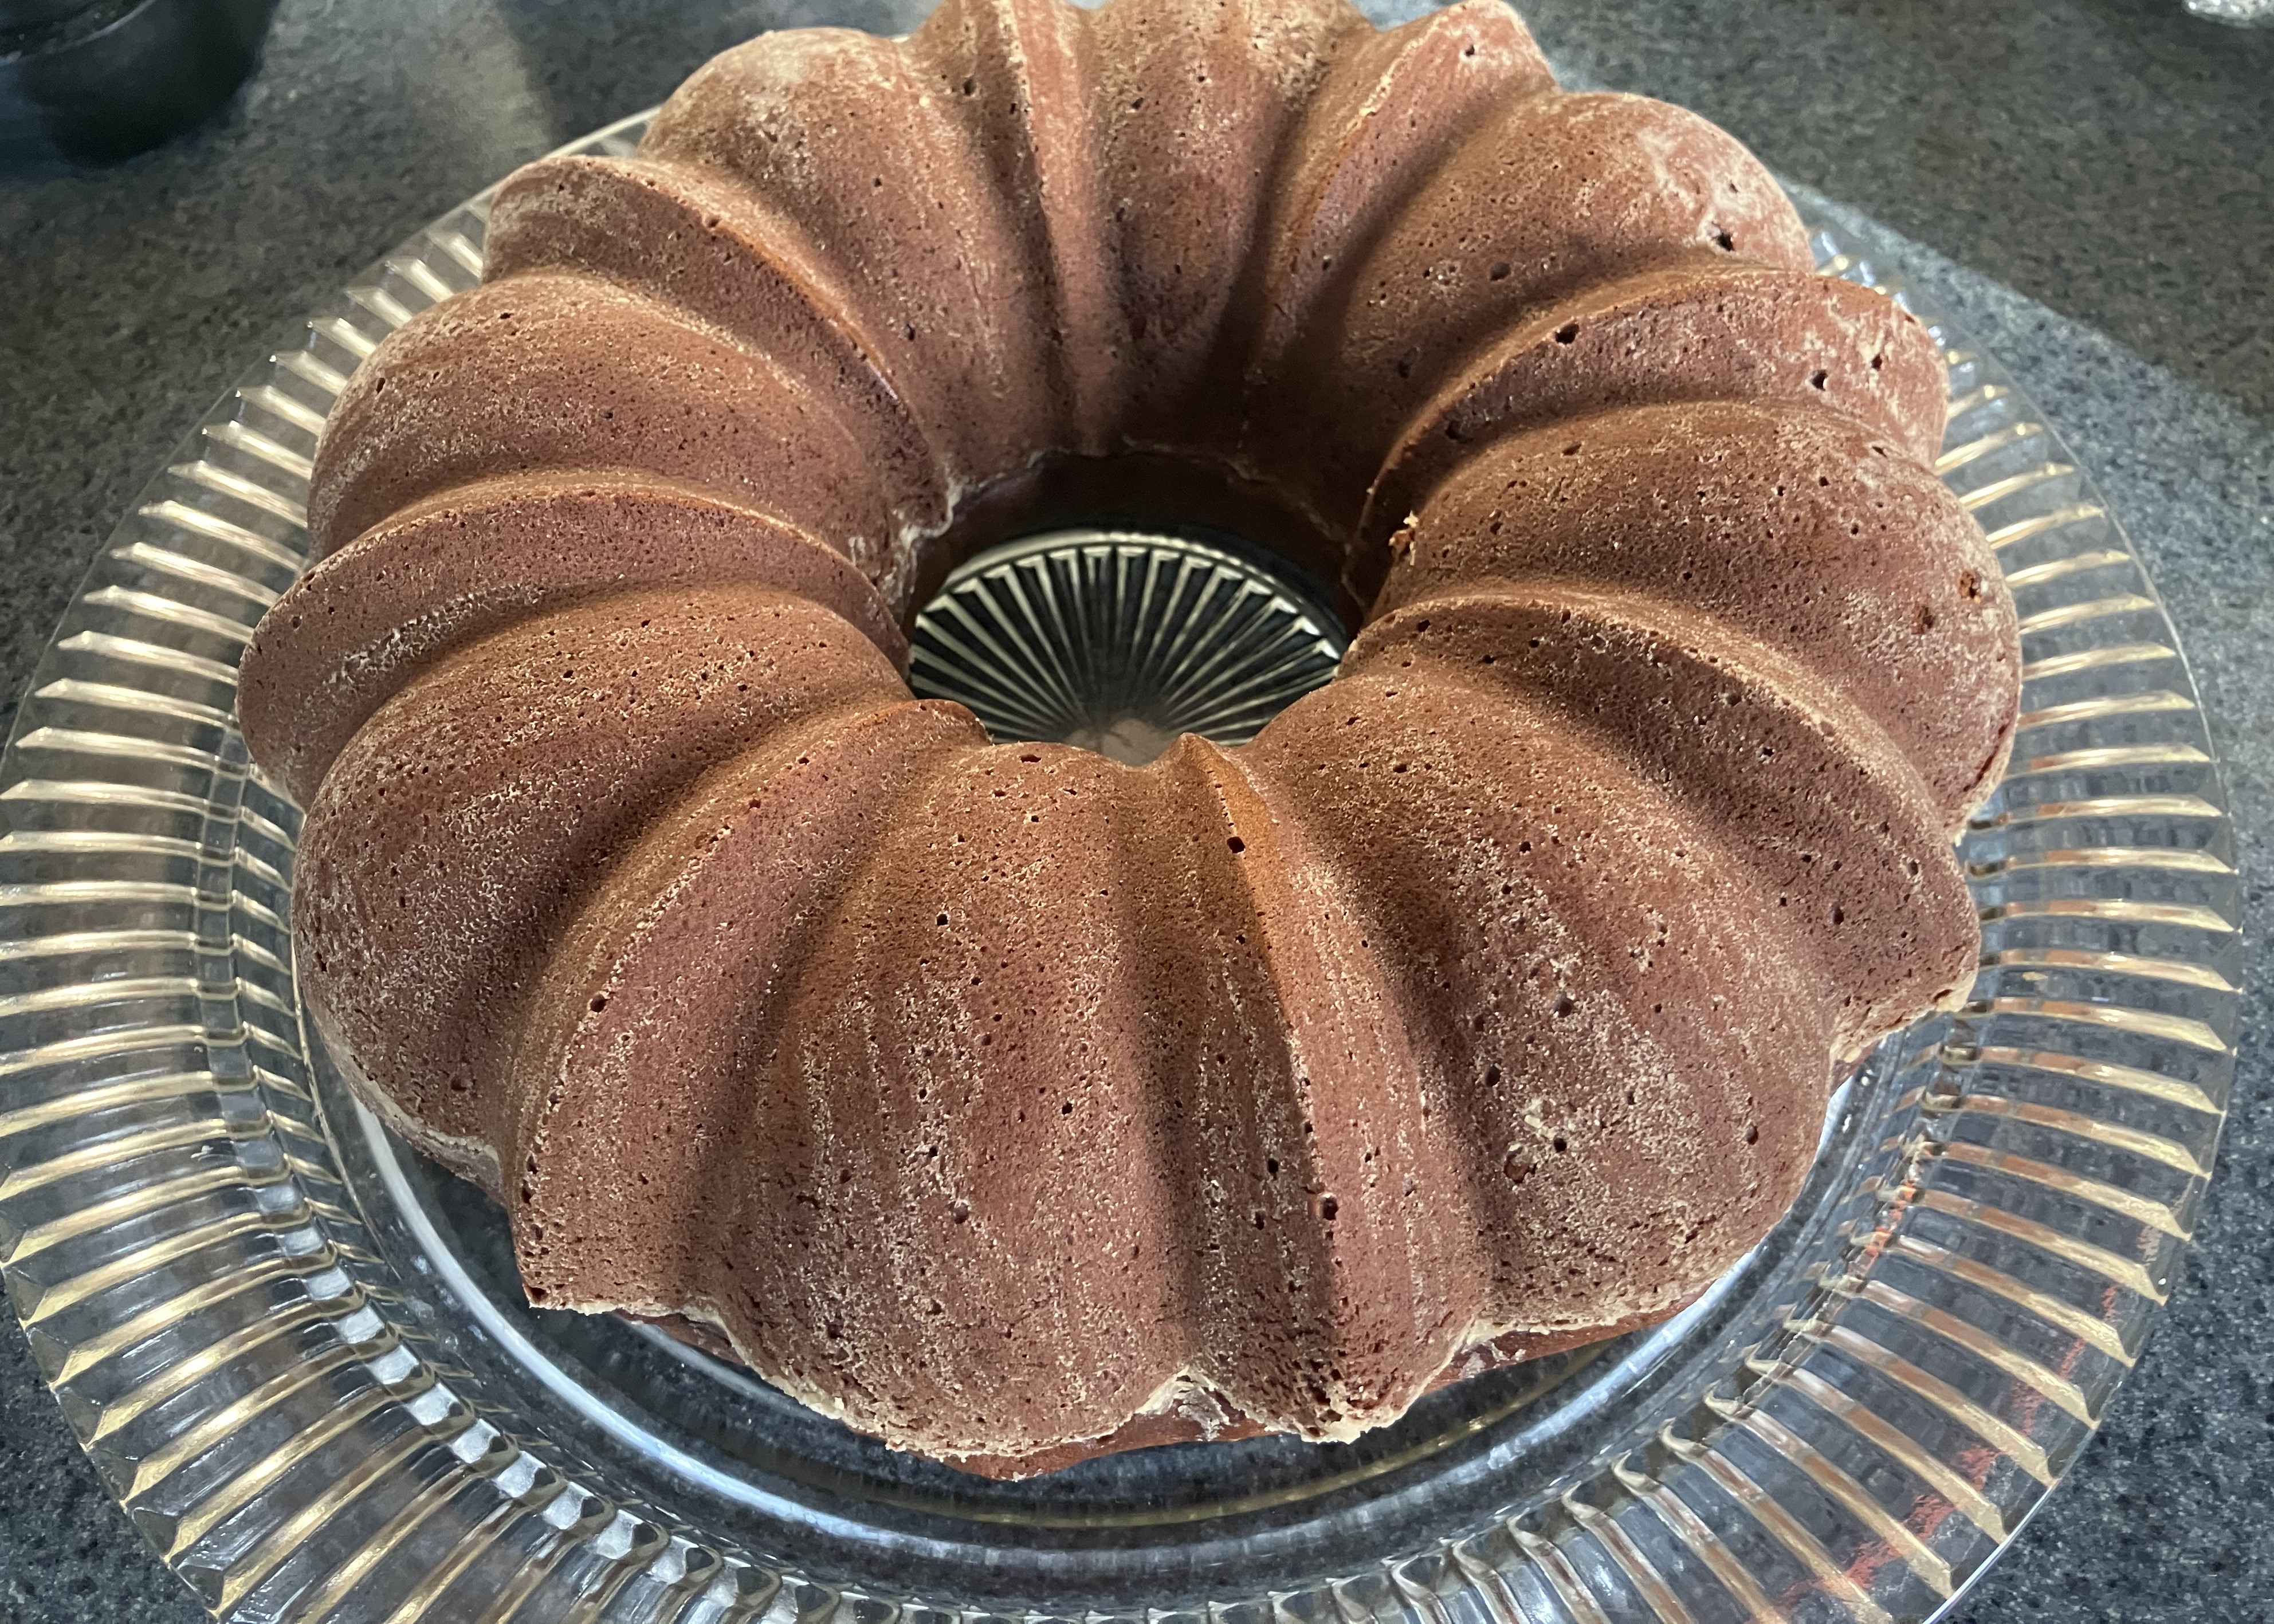 A round, baked cake that was shaped by a decorative bundt pan.